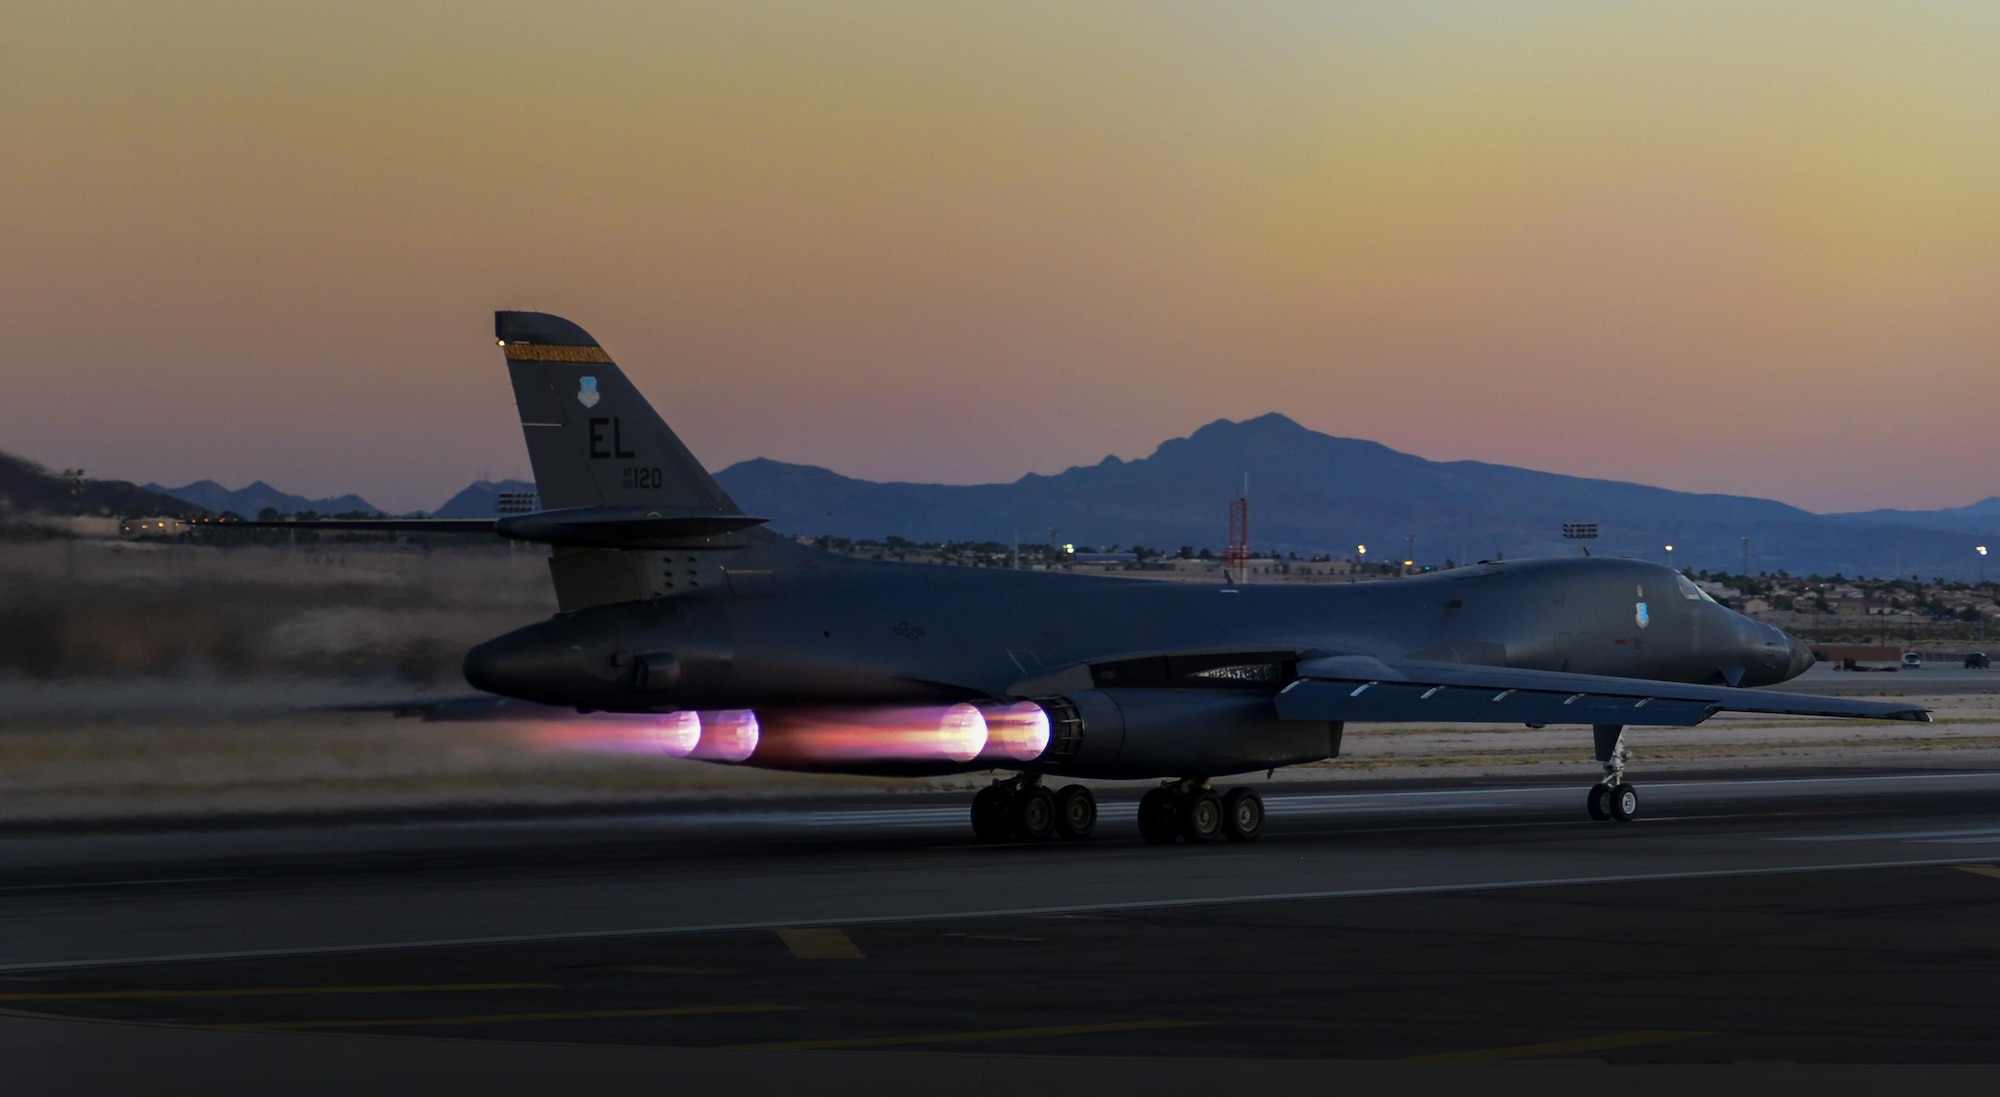 A B-1 Lancer, assigned to the 34th Bomb Squadron, Ellsworth Air Force Base, South Dakota, takes off during Deliberate Strike Night at Nellis Air Force Base, Nevada, June 16, 2016. Composed of six different missions, Advanced Integration contains one of the most dynamic pertaining to fourth and fifth Generation airframes, a night exercise known as Deliberate Strike Night. (U.S. Air Force photo by Airman 1st Class Kevin Tanenbaum) 